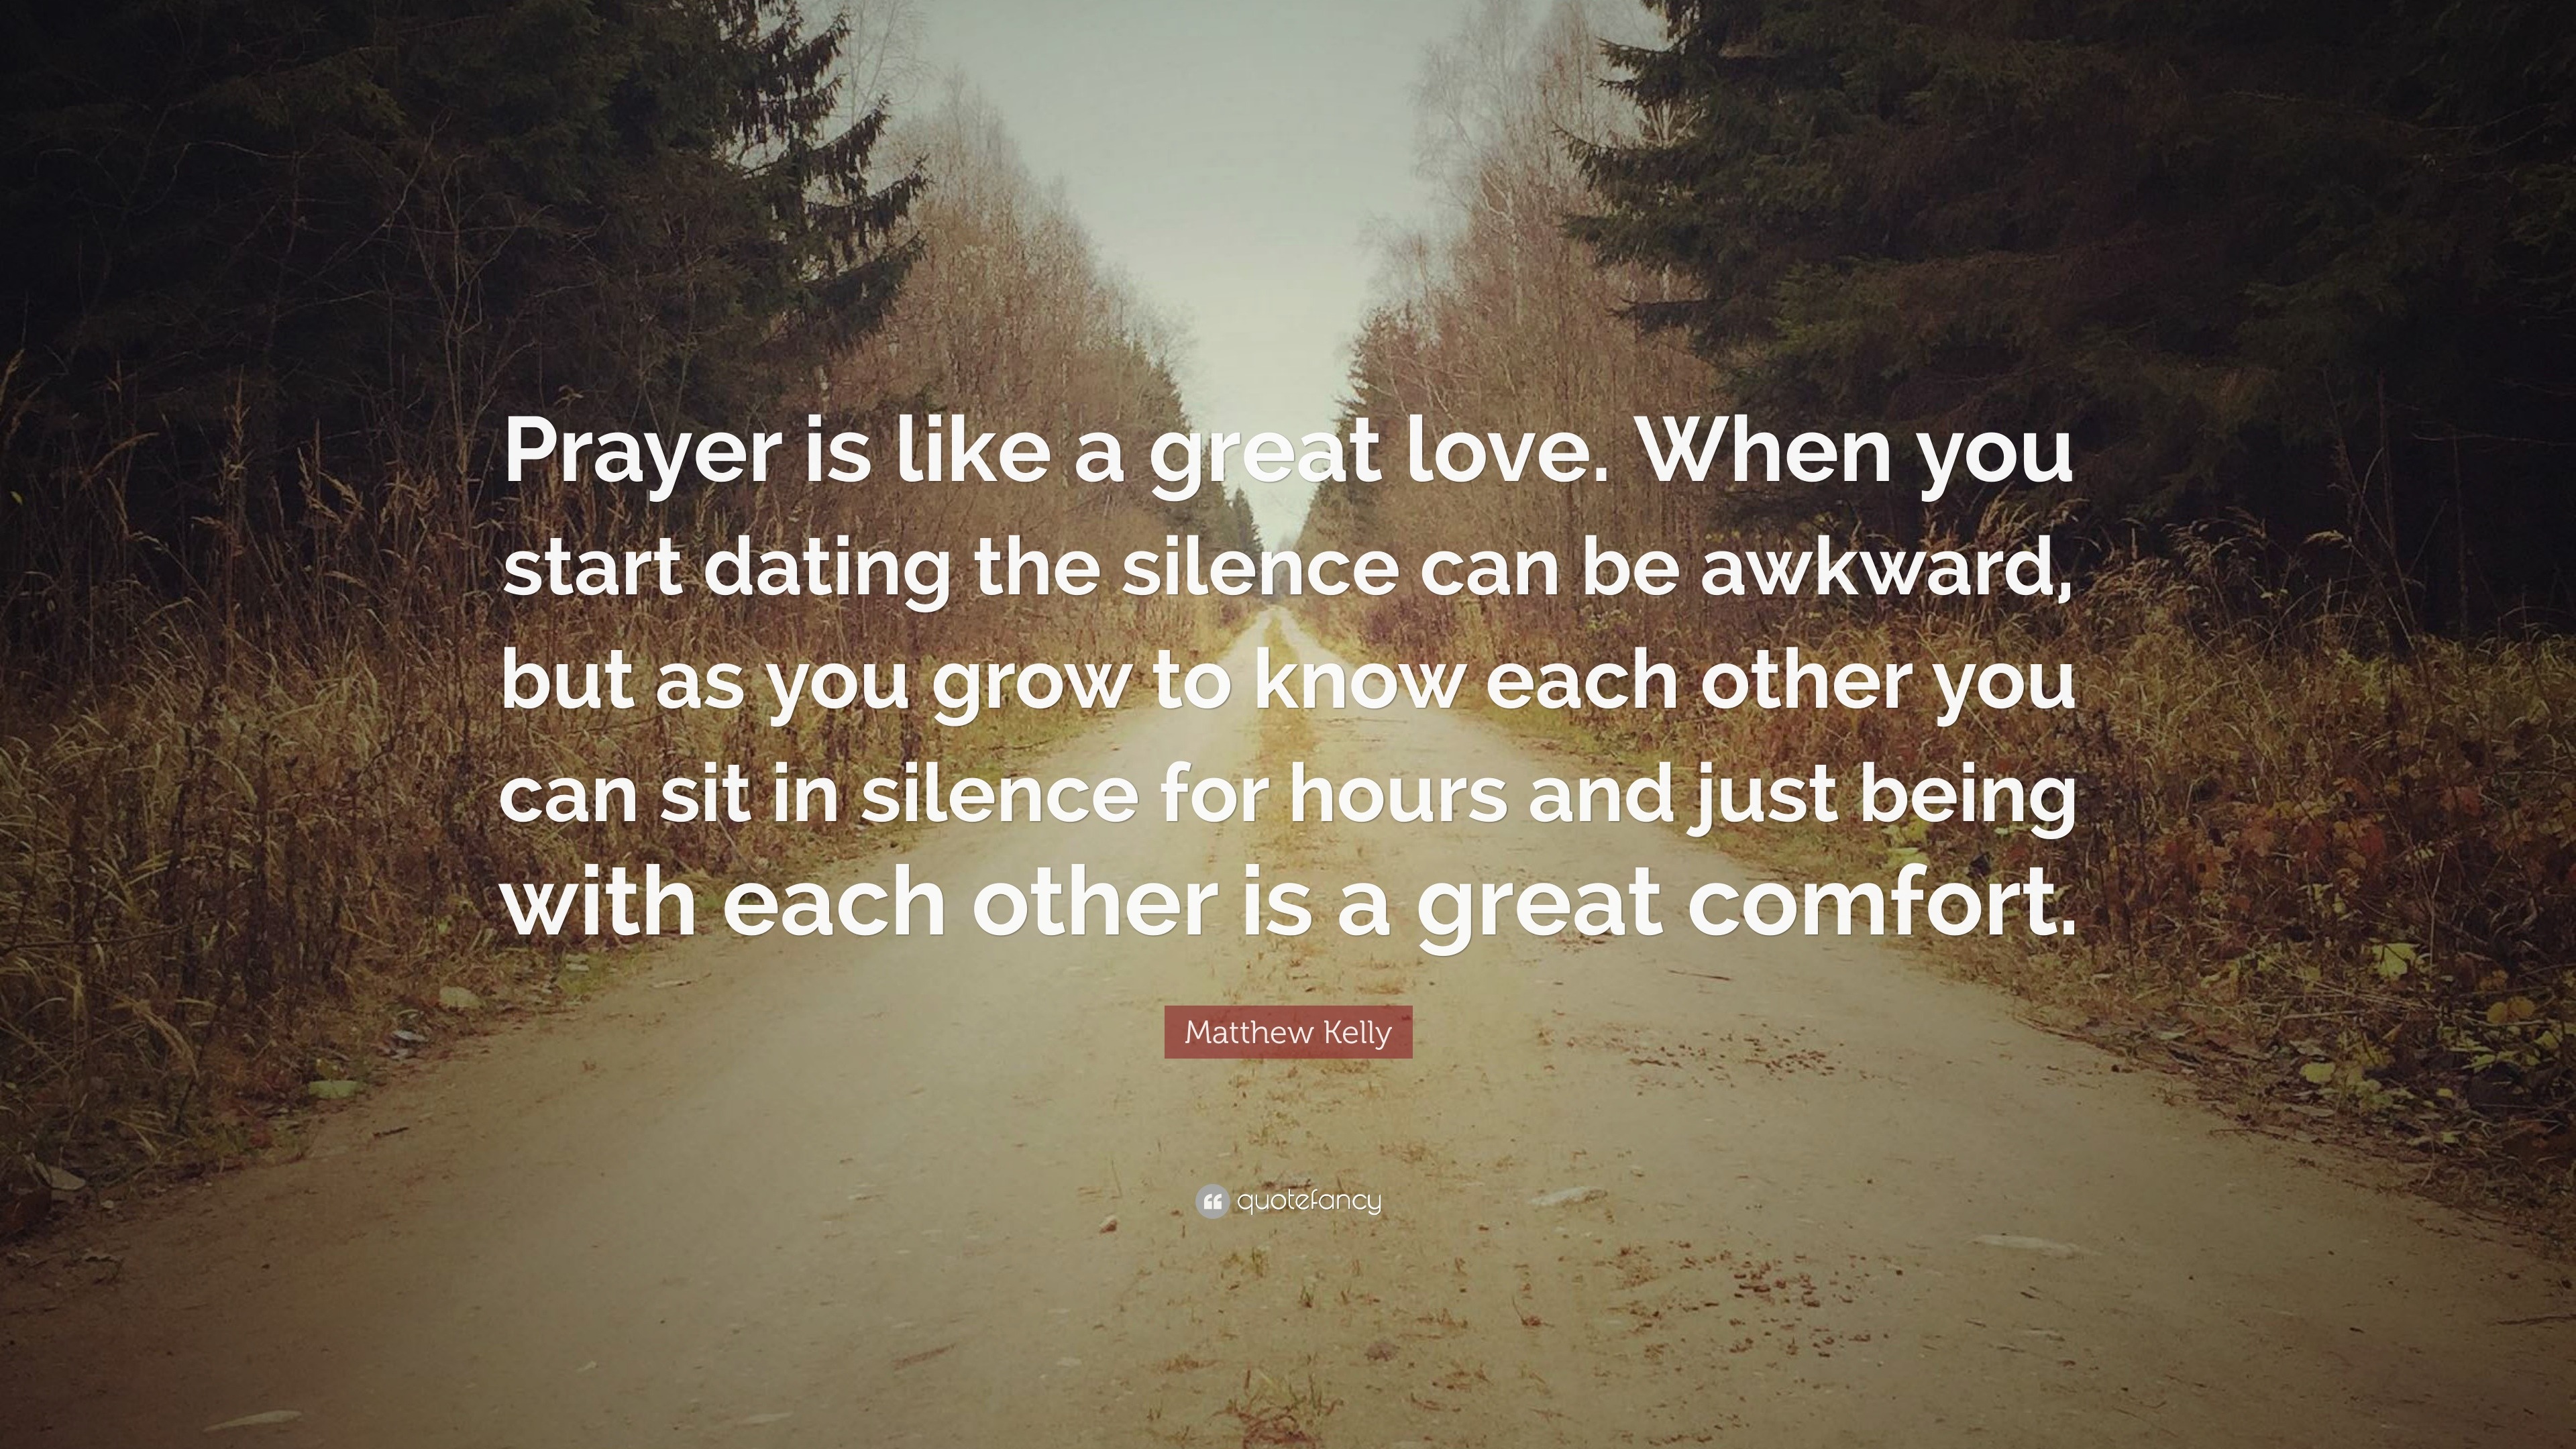 Matthew Kelly Quote “Prayer is like a great love When you start dating